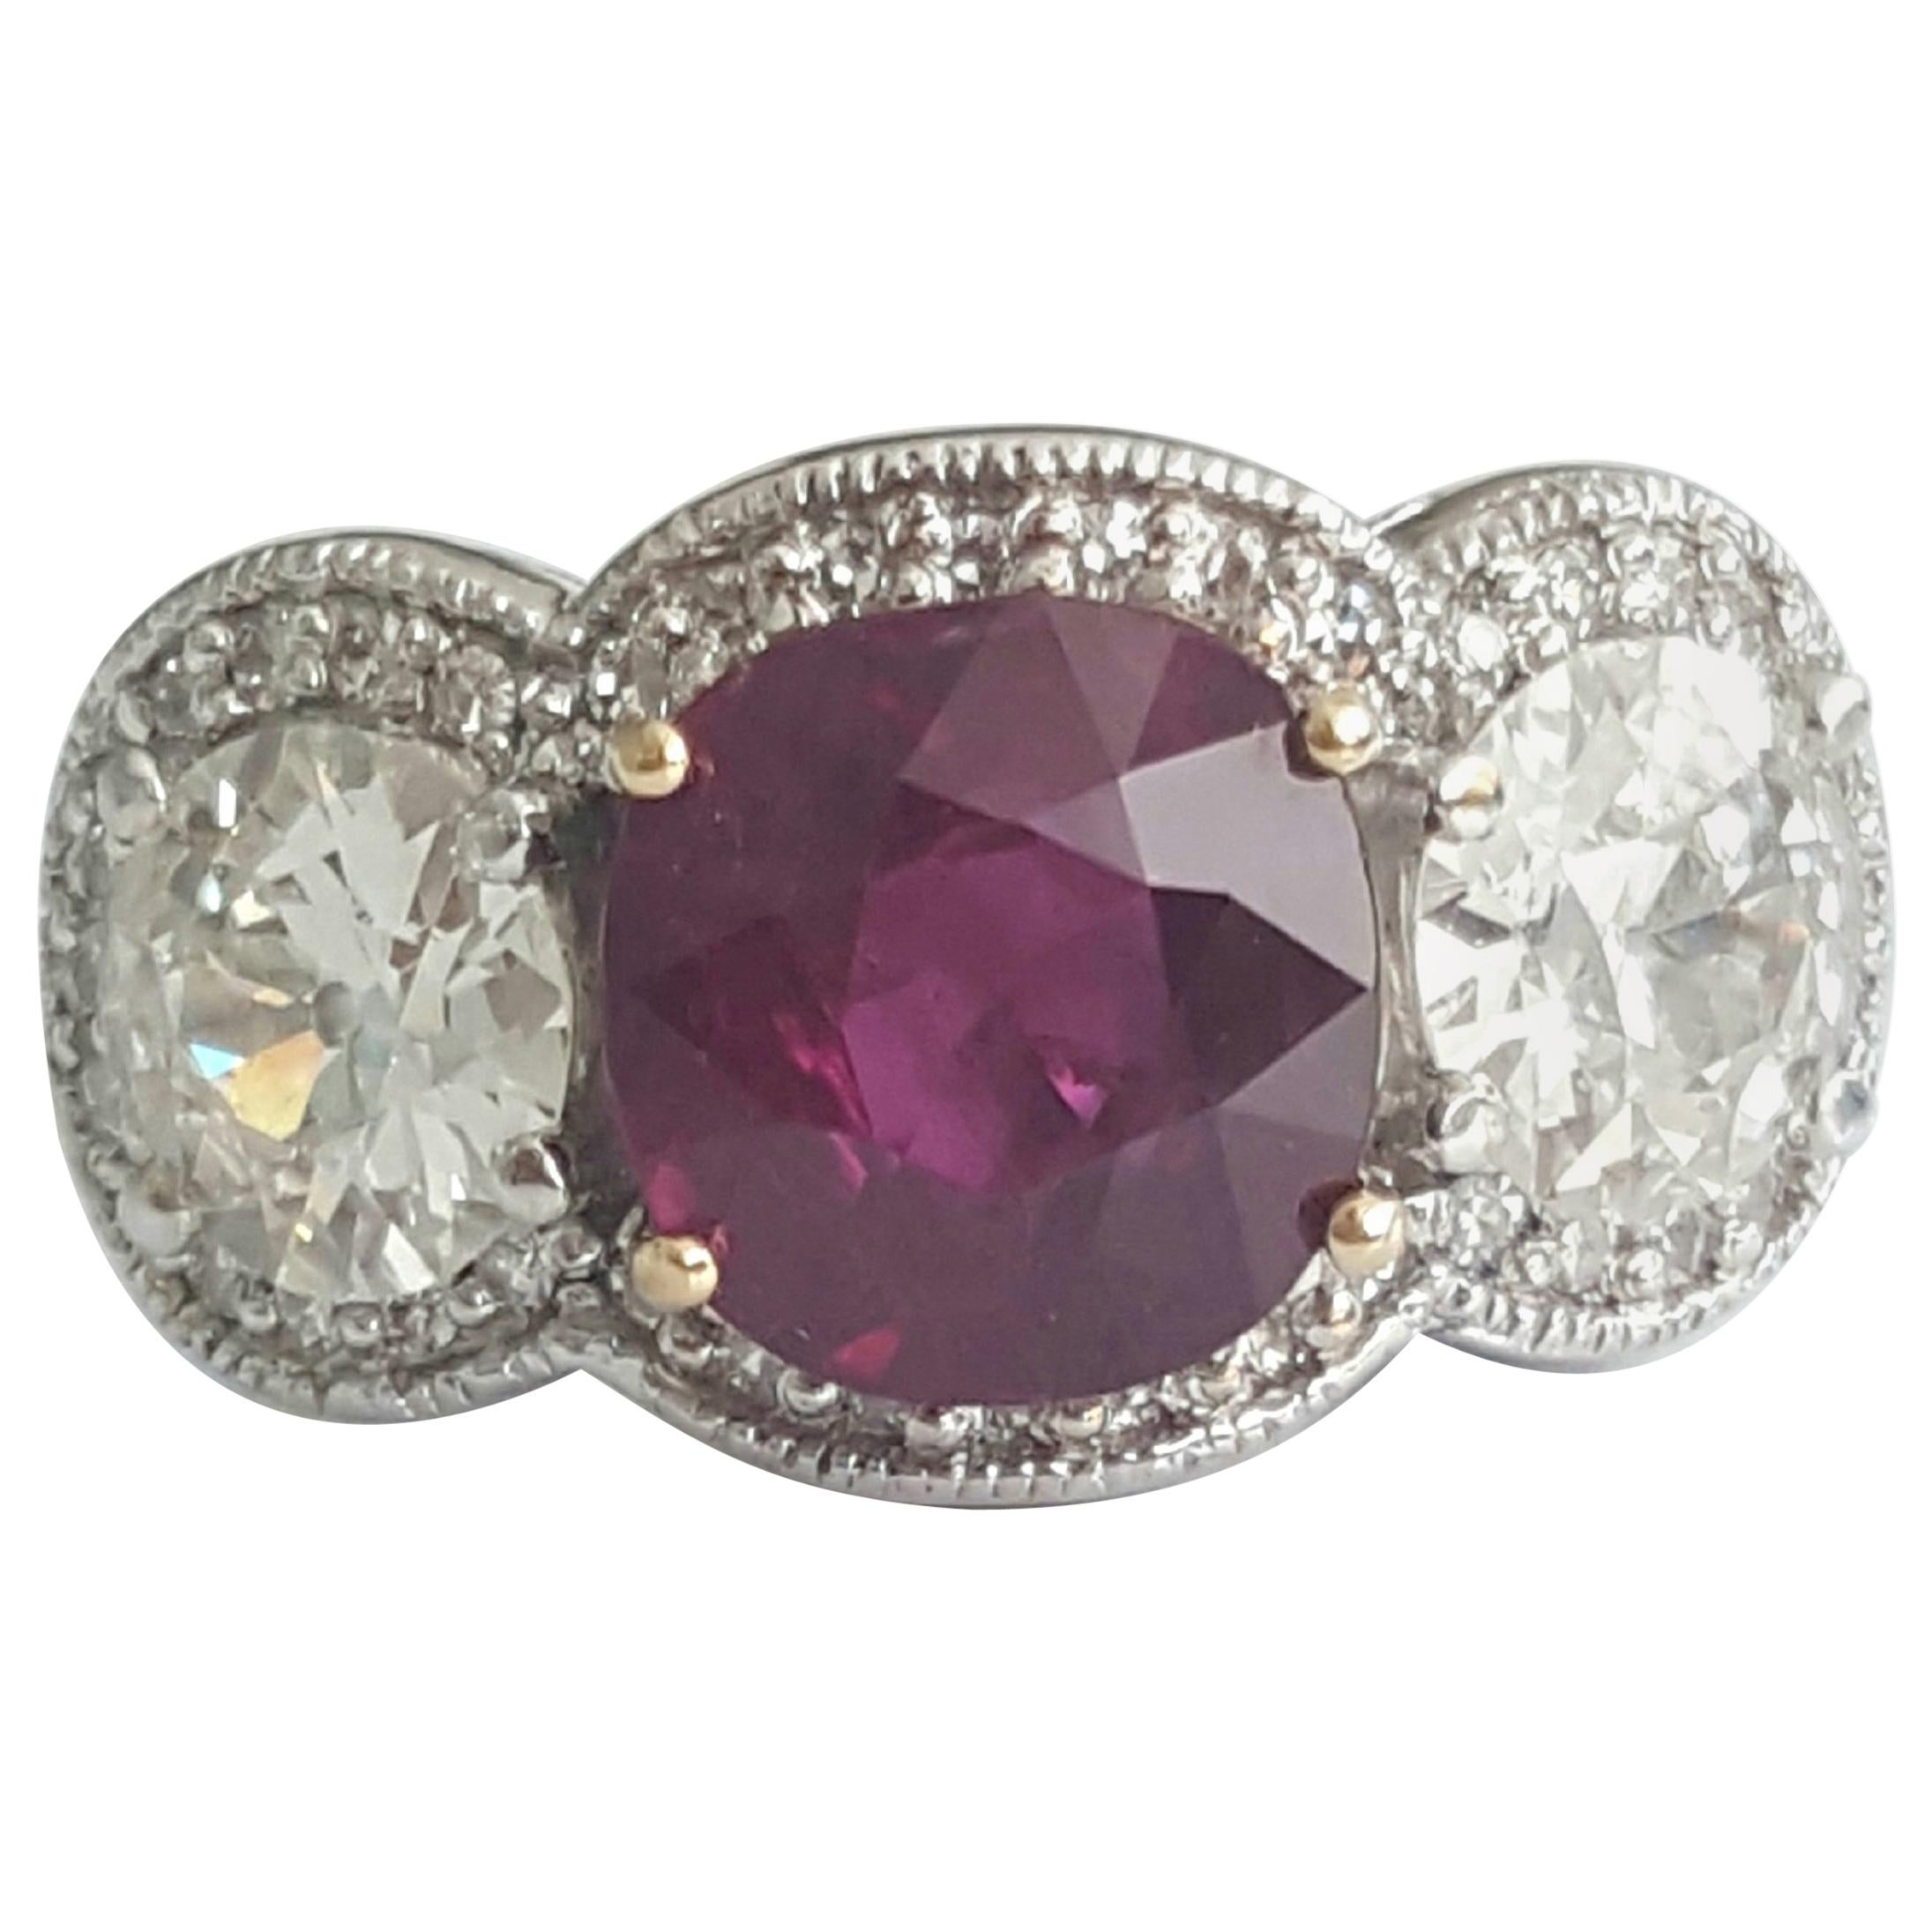 5.03 Carat Natural Cushion Ruby And White Round Old Cut Diamond Ring In 18K.